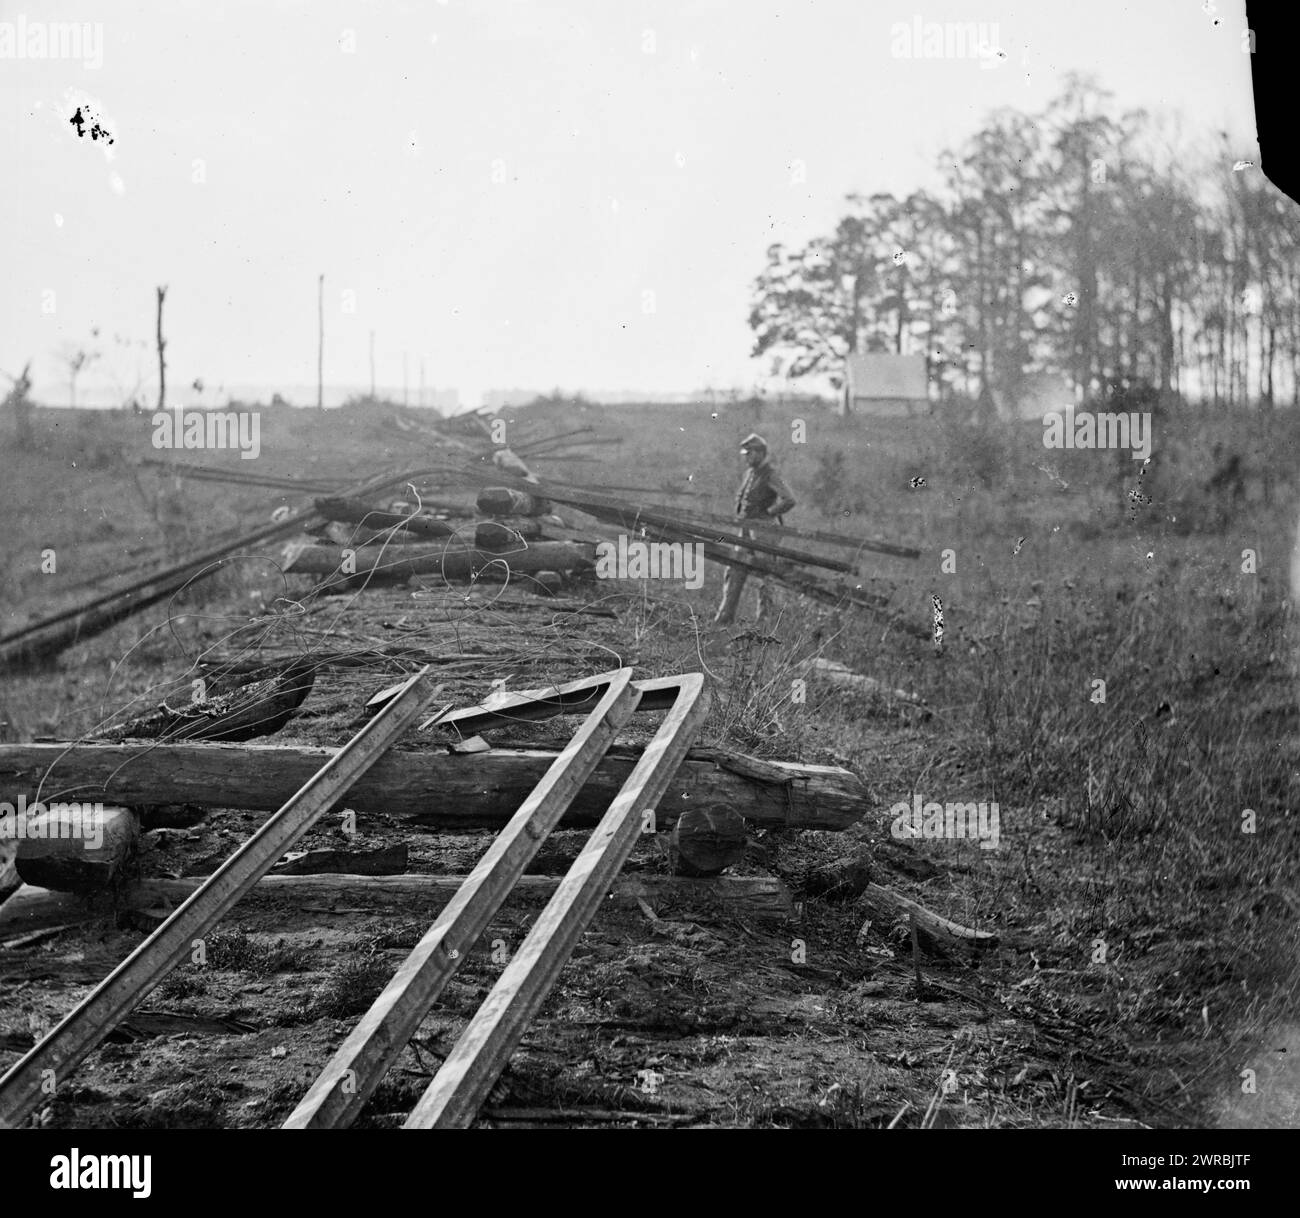 Virginia. Tracks of the Orange & Alexandria Railroad, destroyed by the Confederates between Bristow Station and the Rappahannock, Photograph from the main eastern theater of war, Meade in Virginia, August-November 1863., O'Sullivan, Timothy H., 1840-1882, photographer, 1863 October., United States, History, Civil War, 1861-1865, Transportation, Wet collodion negatives., Wet collodion negatives, 1 negative: glass, wet collodion Stock Photo